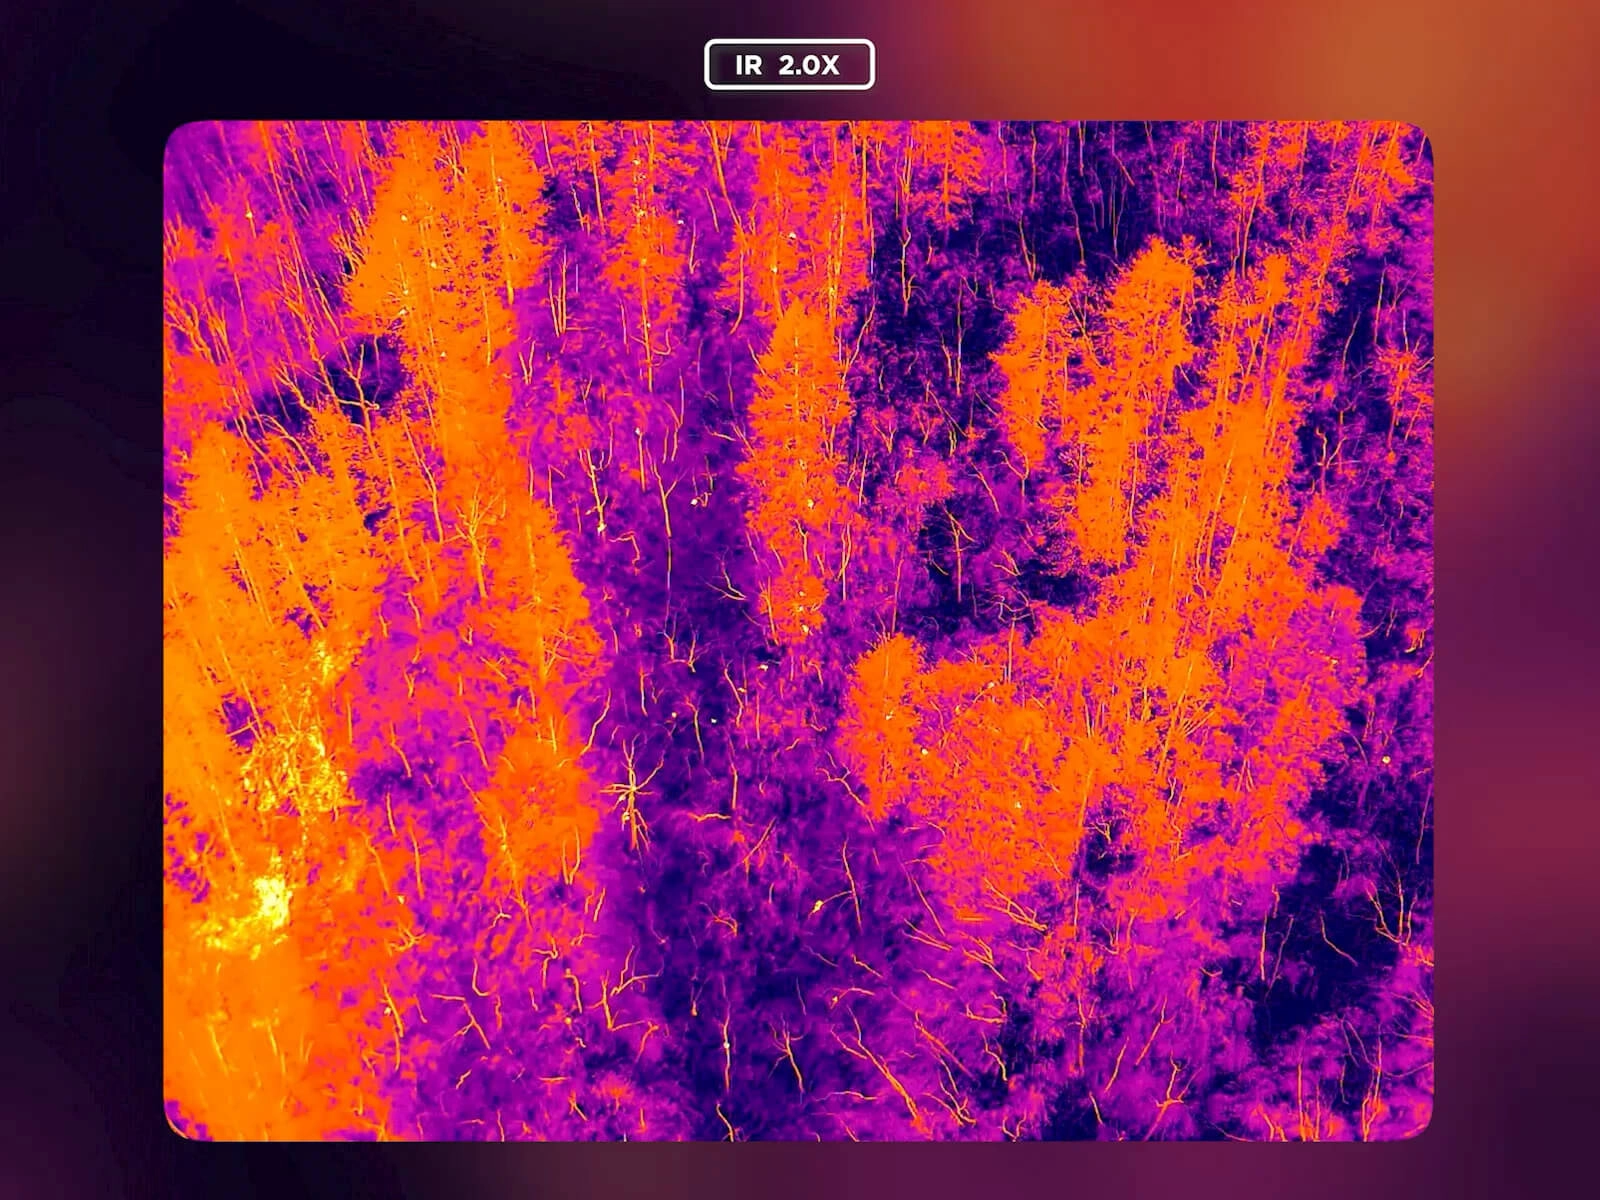 Zenmuse H30T thermal imaging image